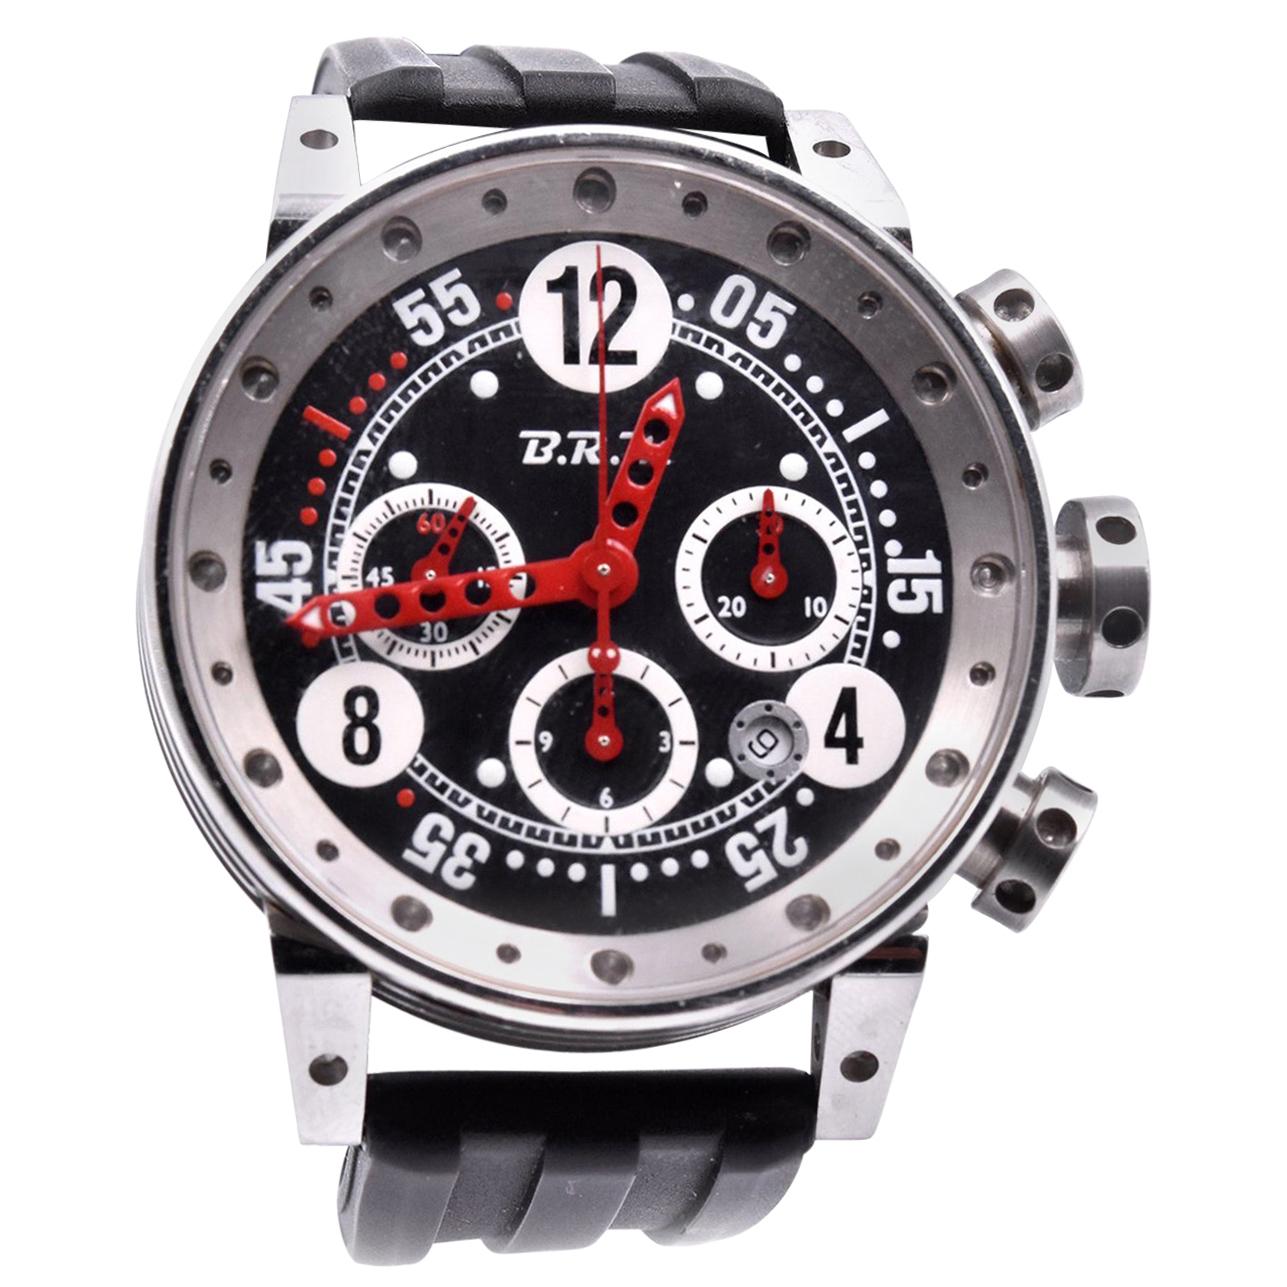 B.R.M Stainless Steel Chronograph Watch Ref. V12